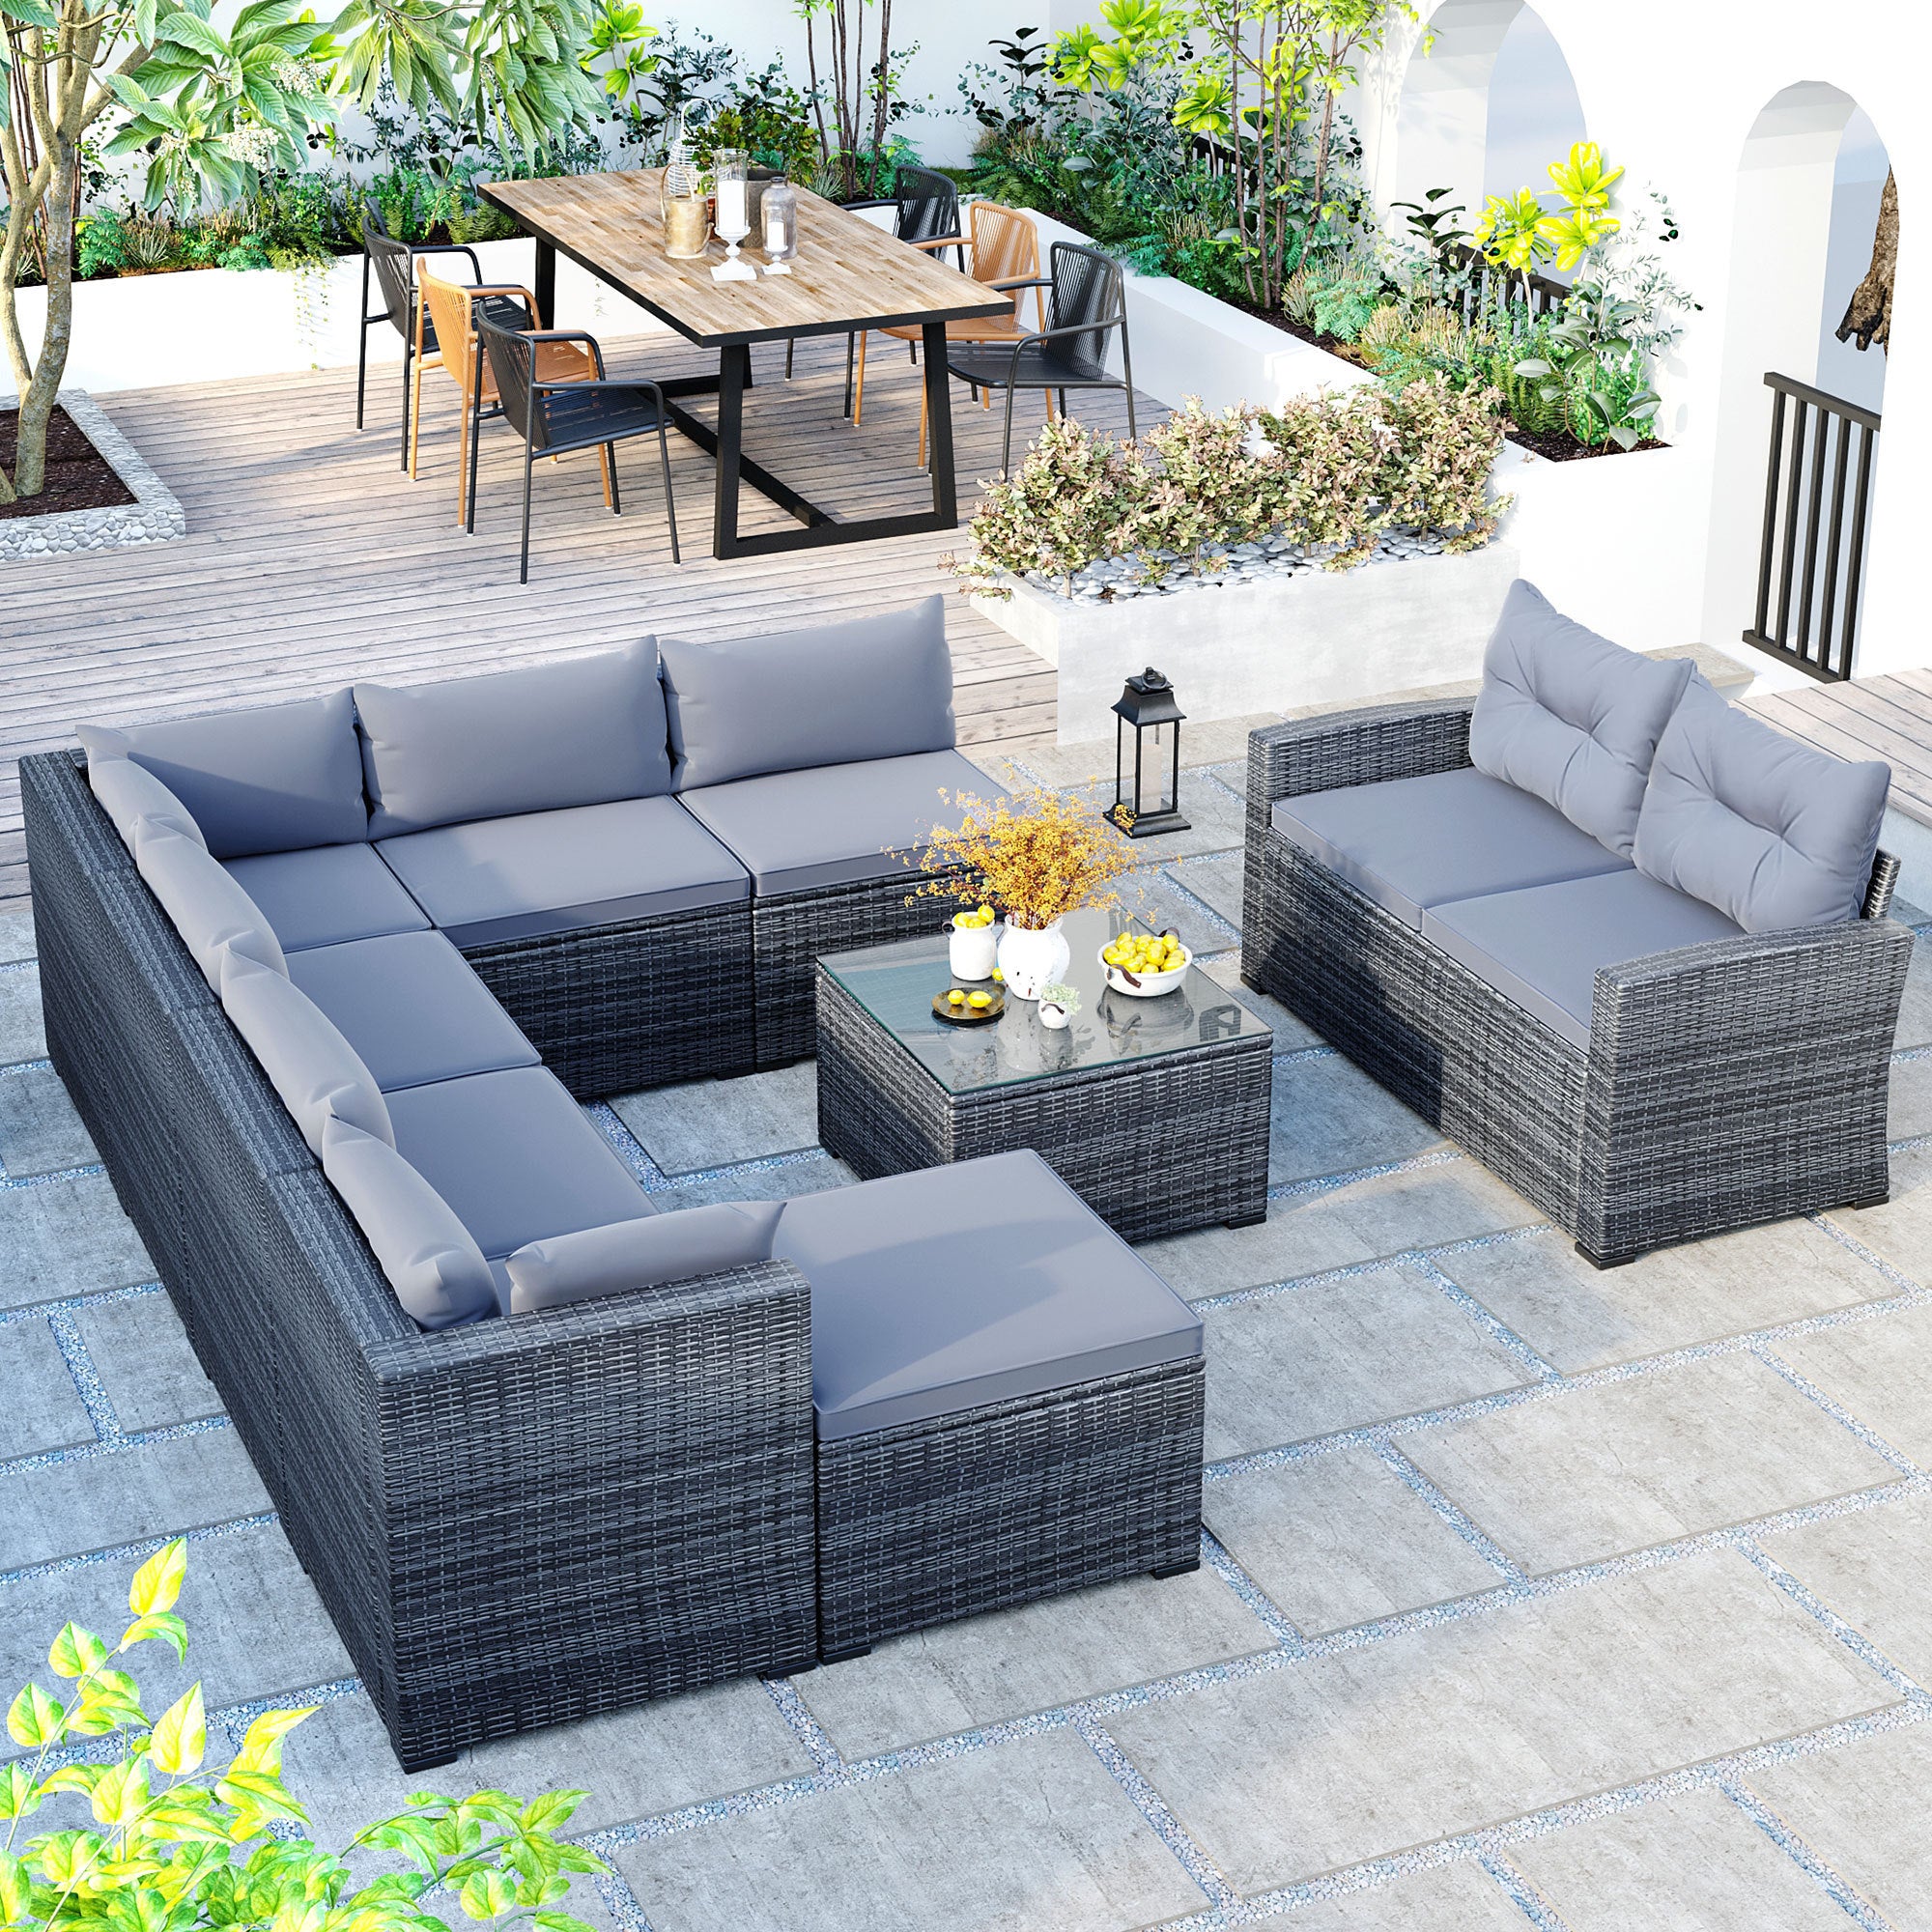 9-piece Outdoor Sectional Sofa Set with Glass Tabletop and Cushions, Gray